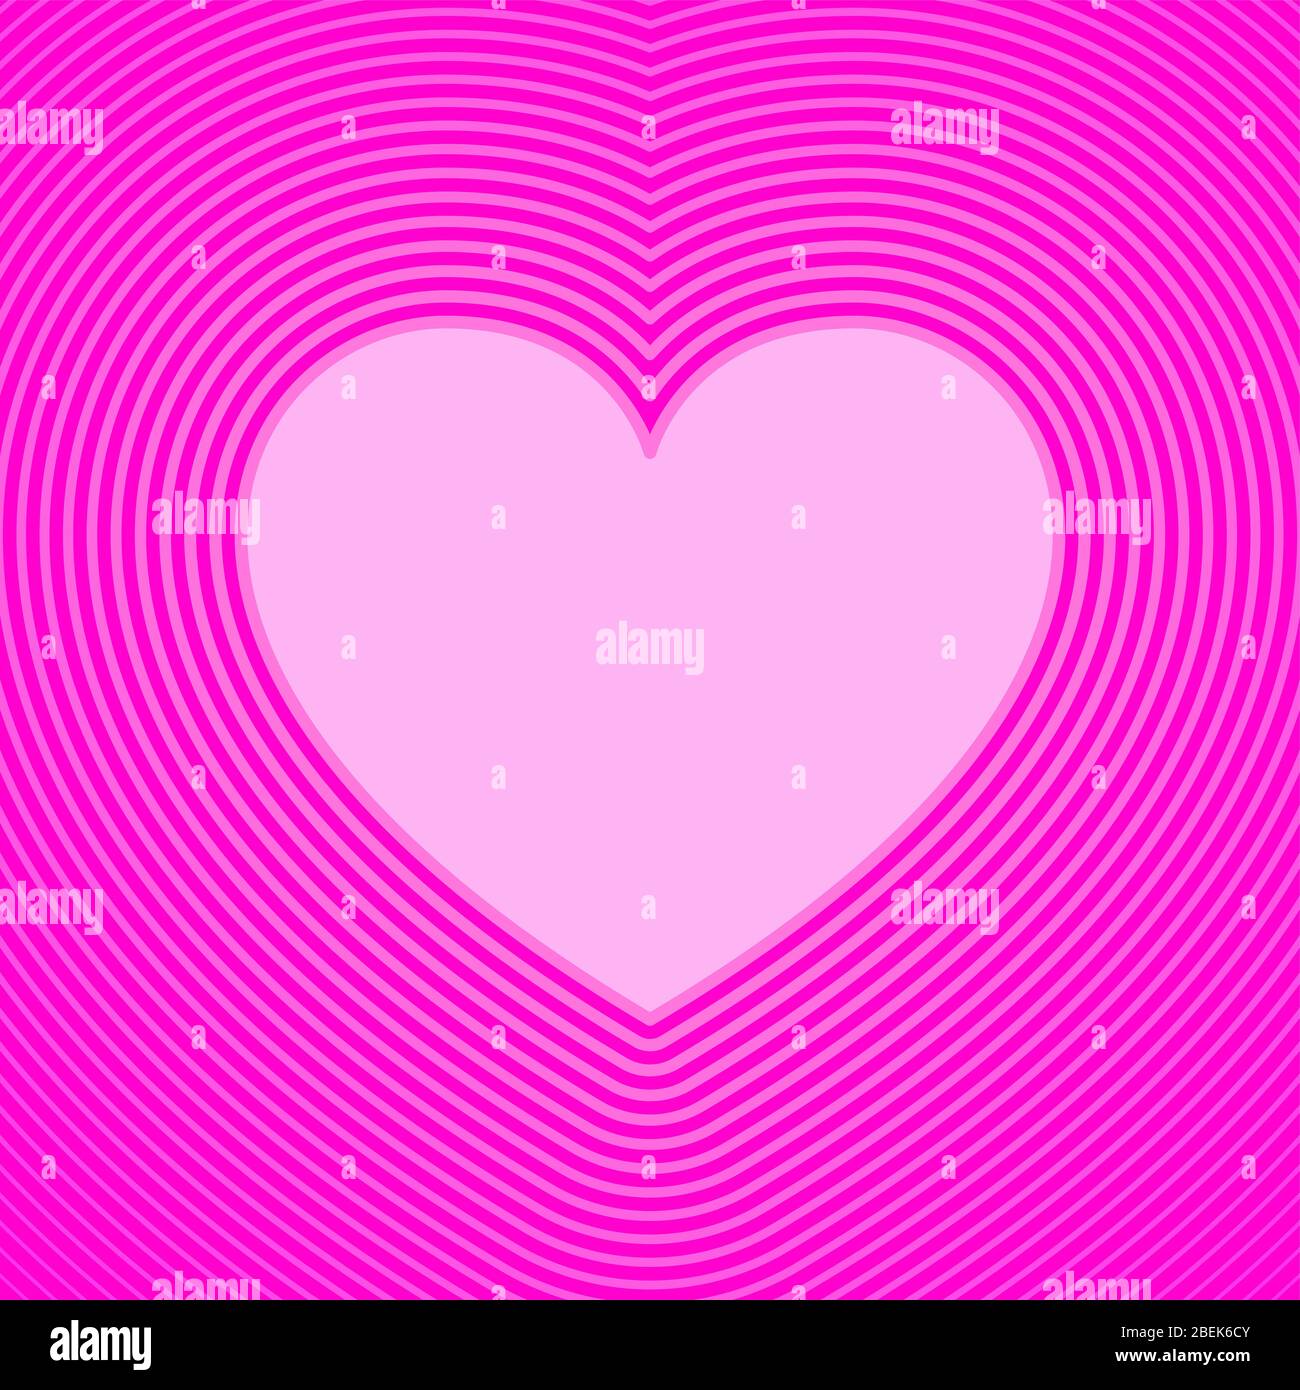 Pink heart symbol with offset lines. Template for use as a background or for a greeting card. The heart shape is an ideograph used to express emotions Stock Photo